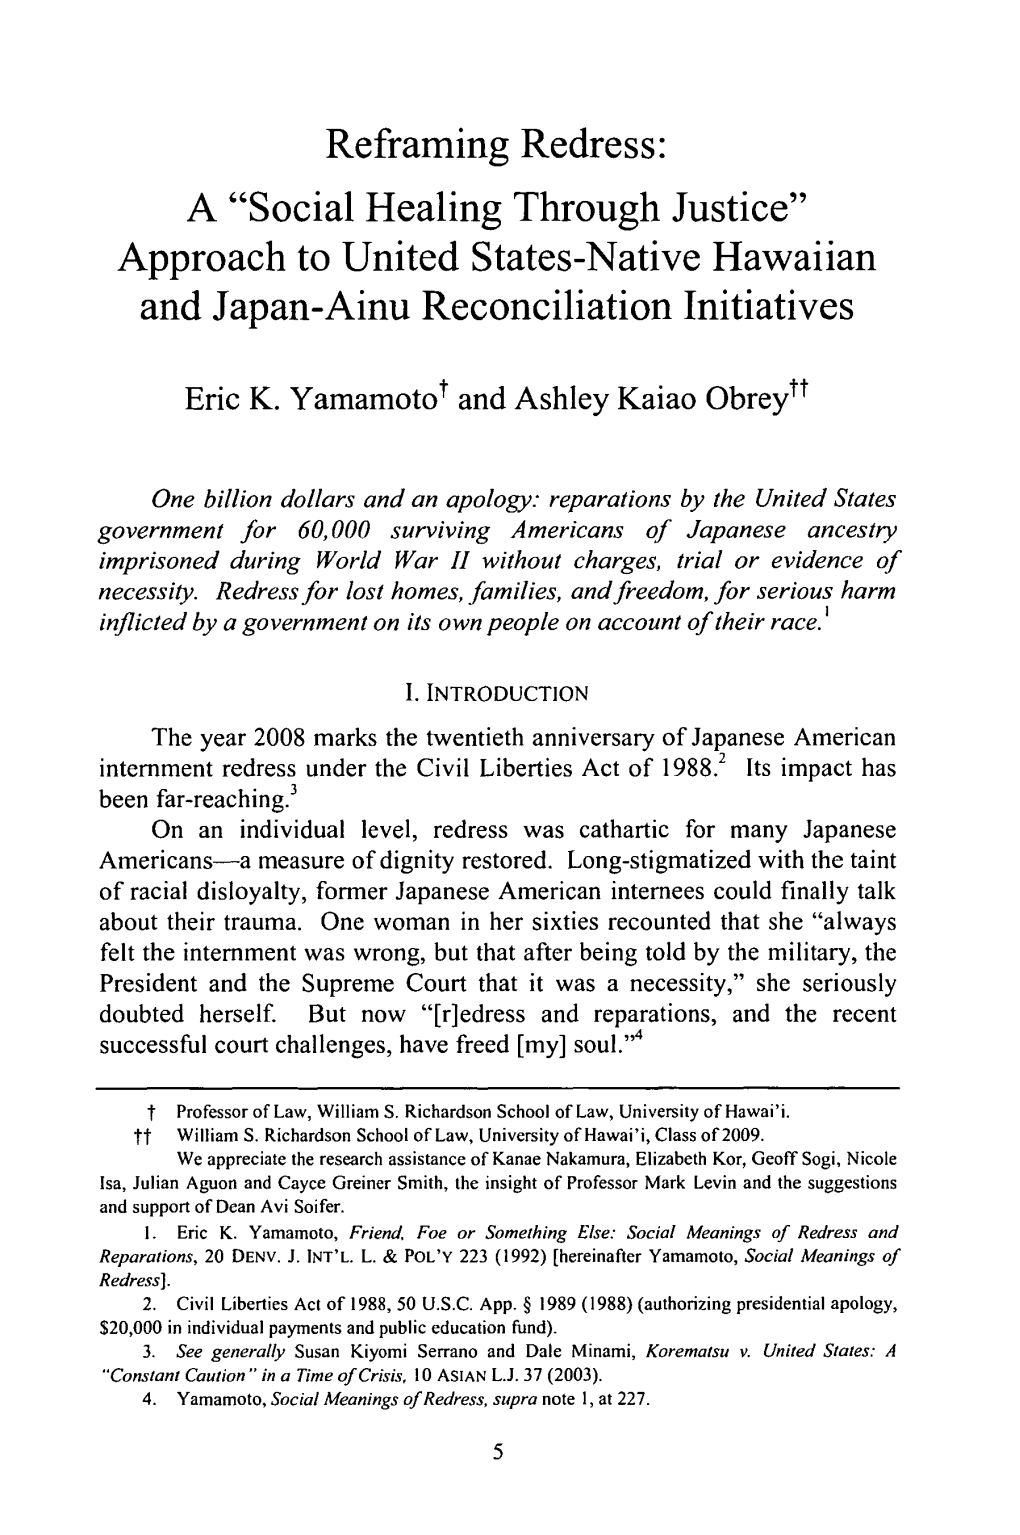 Refraining Redress: a "Social Healing Through Justice" Approach to United States-Native Hawaiian and Japan-Ainu Reconciliation Initiatives